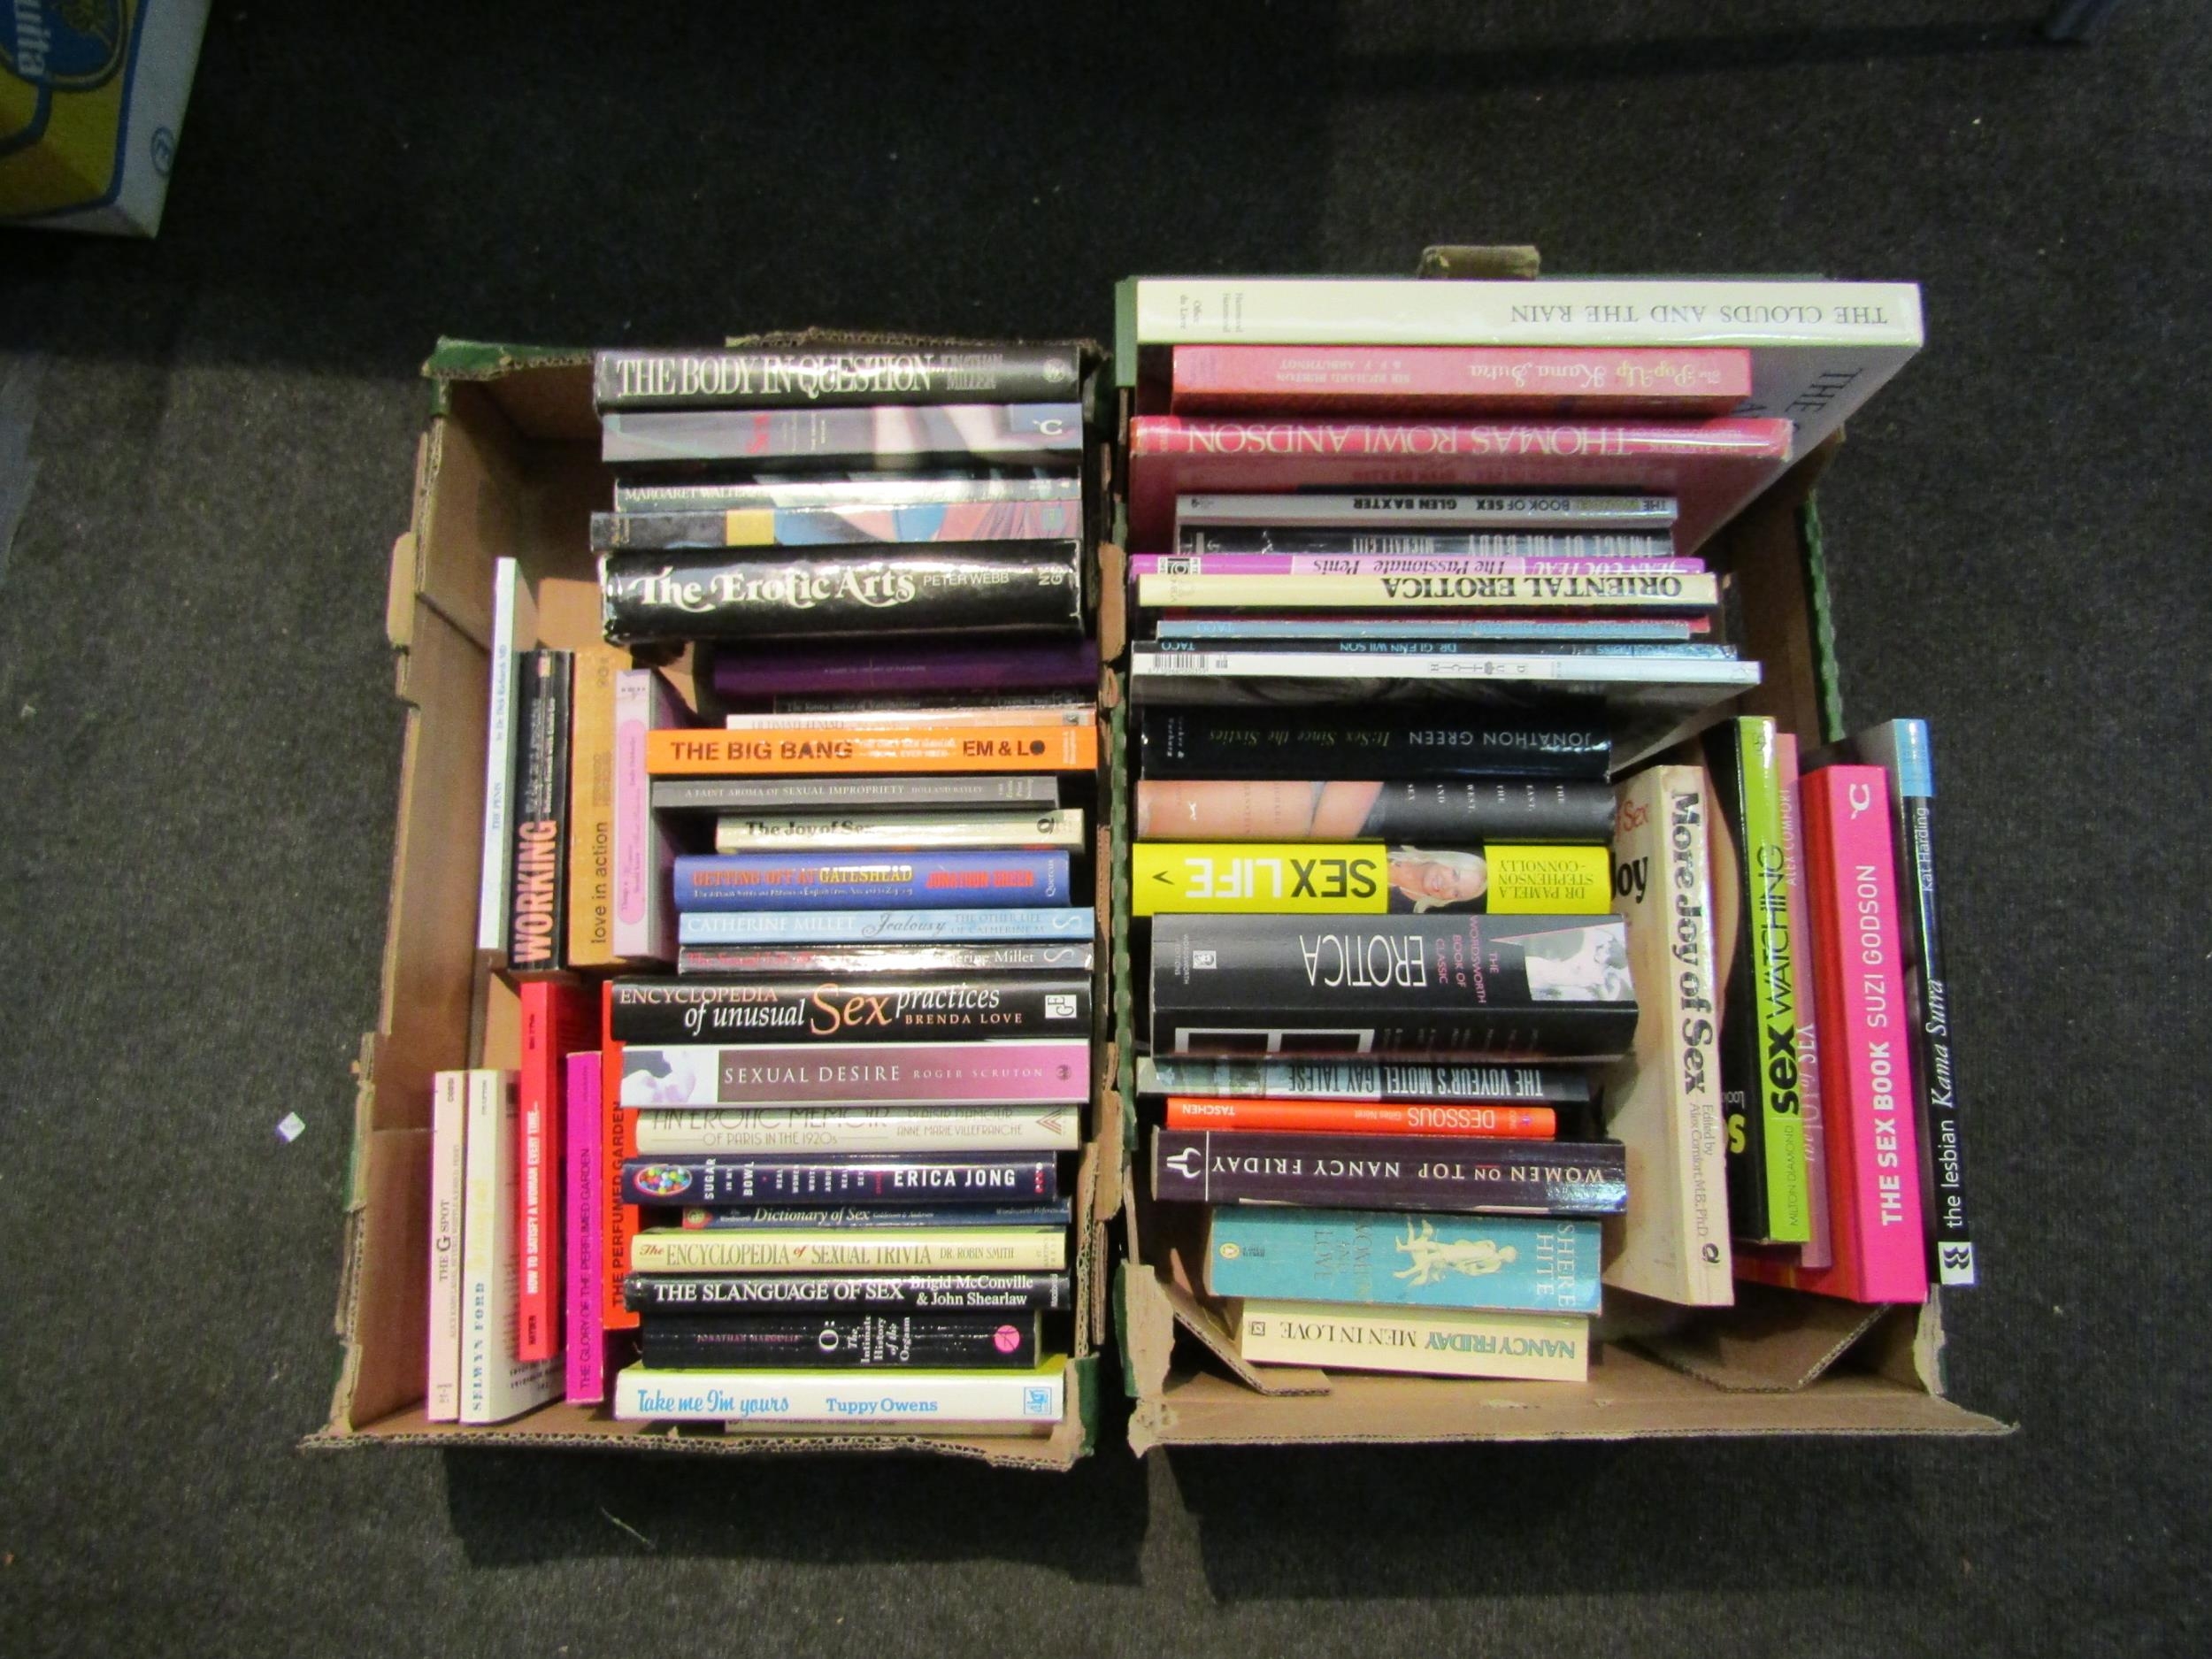 Two boxes of erotica and sex related books, including "The Clouds and the Rain, the Art of Love in